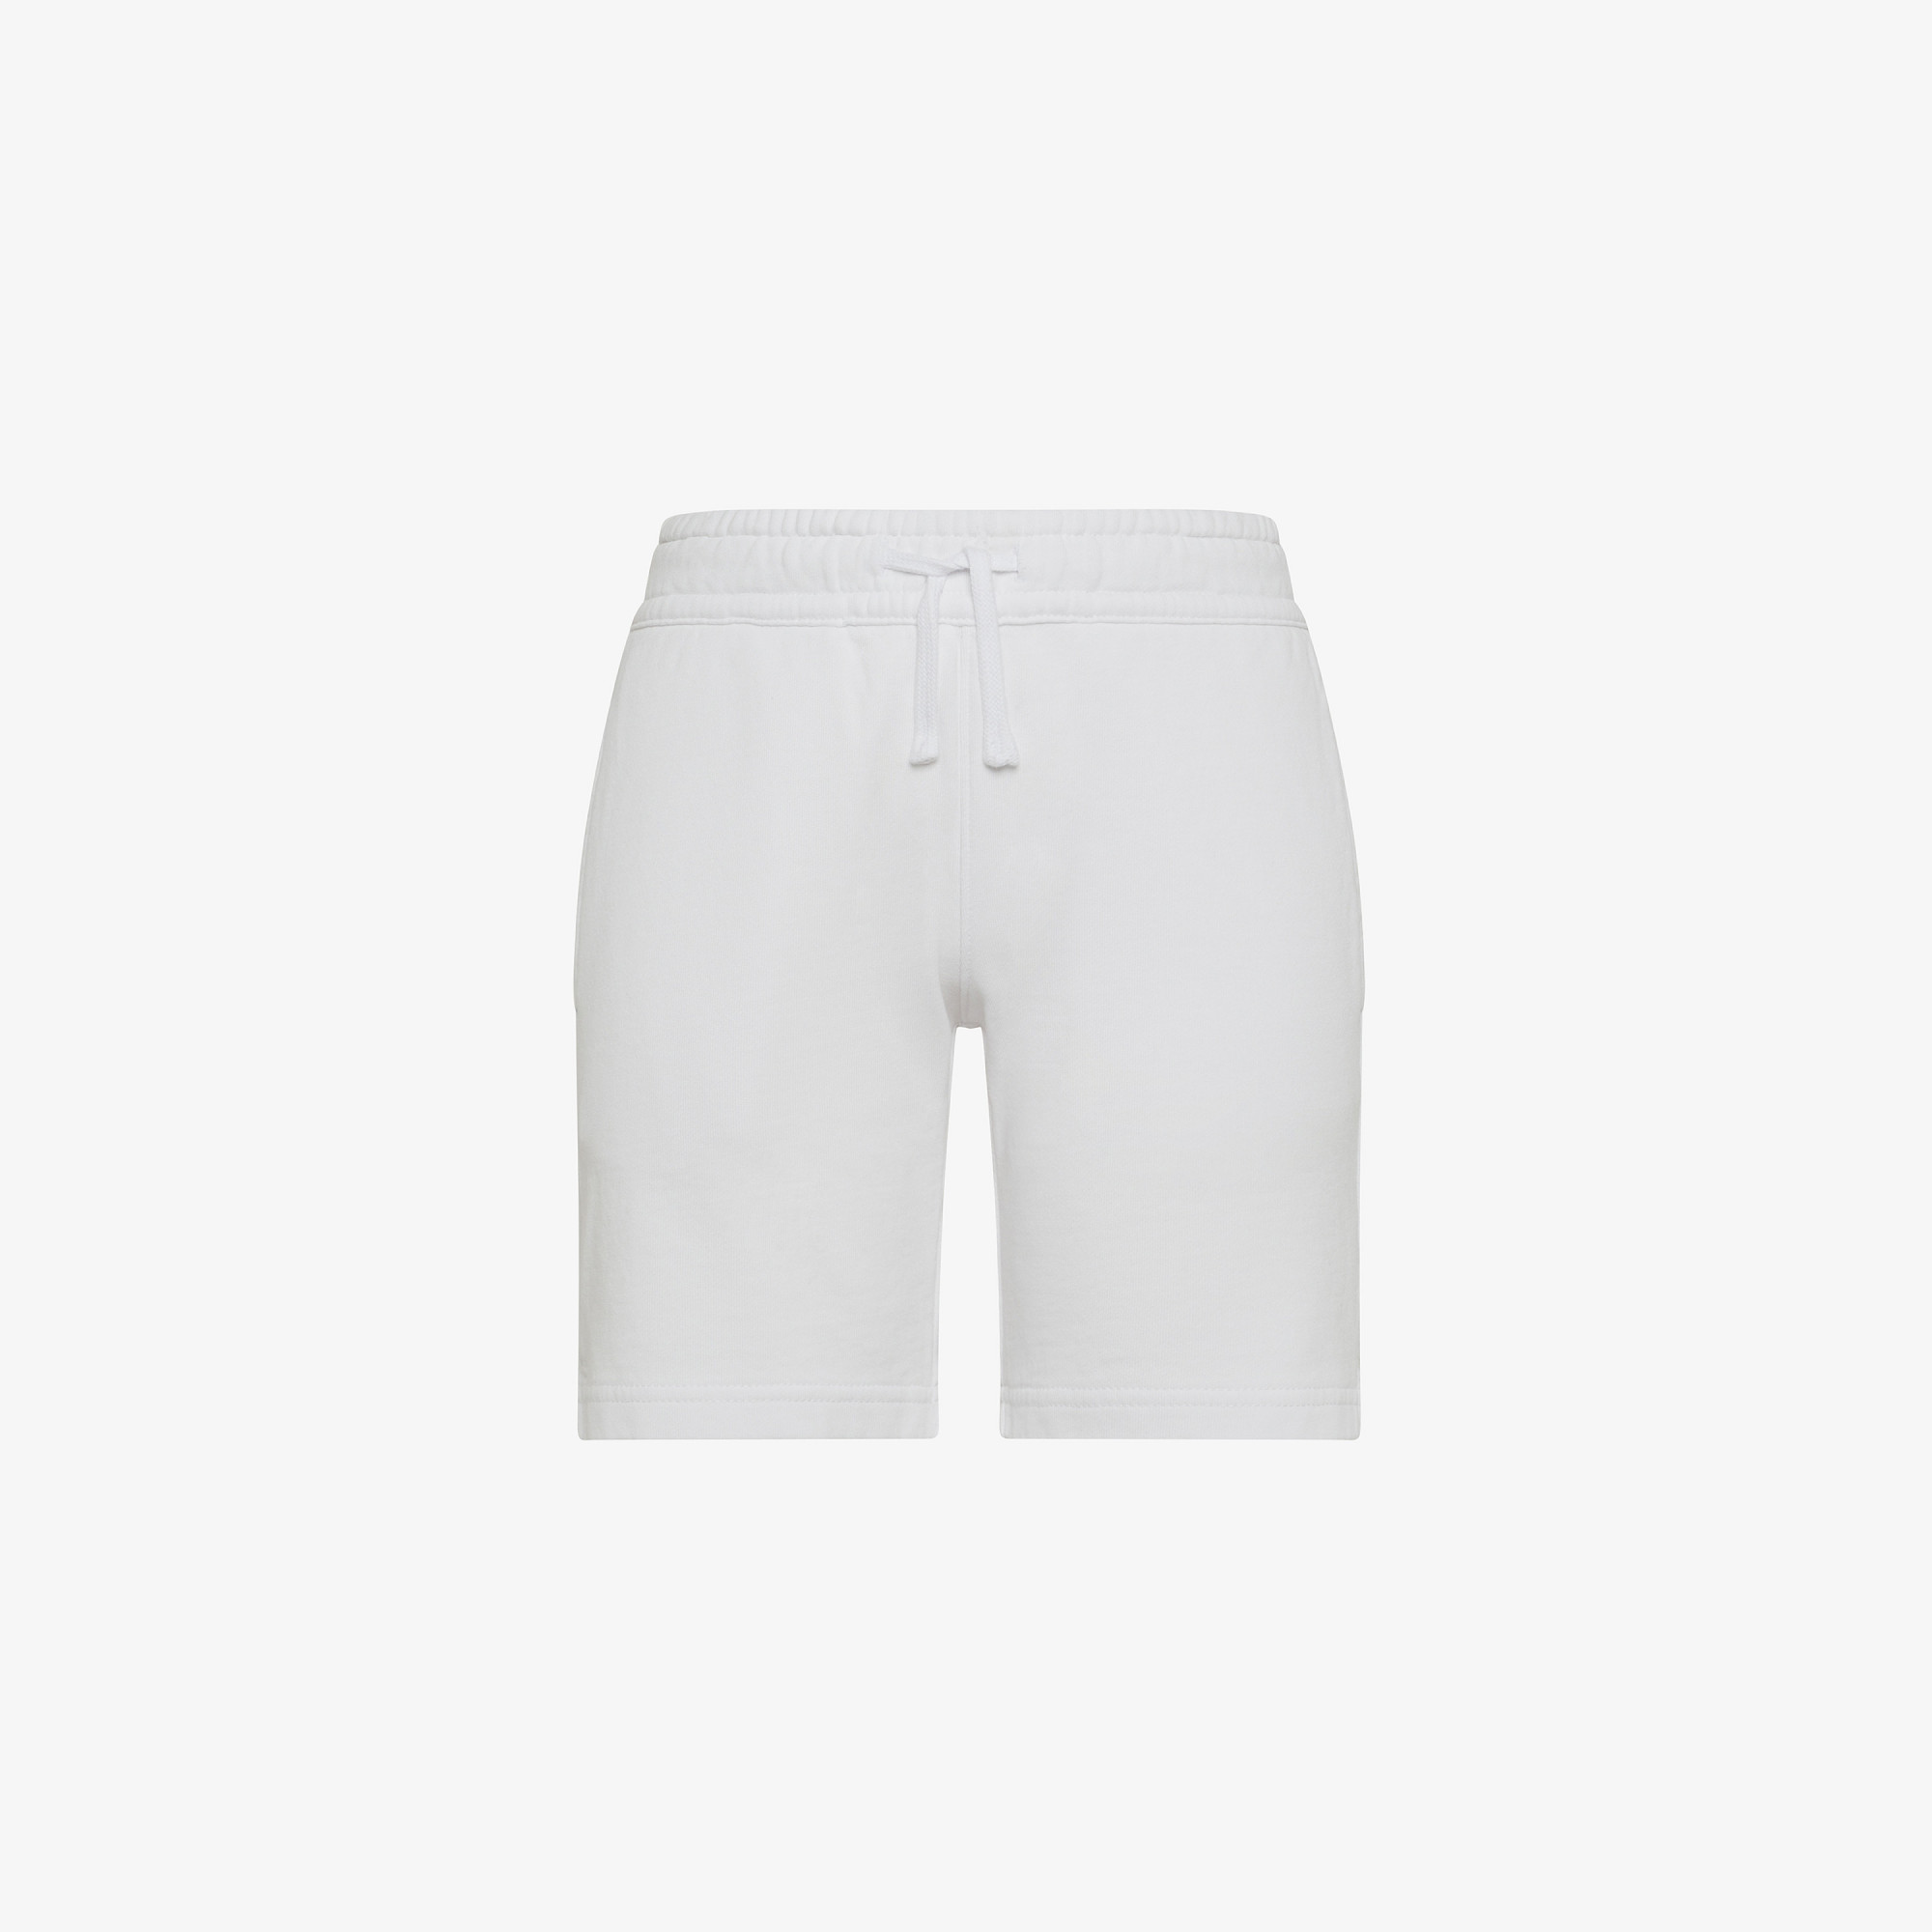 BOY'S SHORT PANT SPECIAL DYED COTT. FL. OFF WHITE